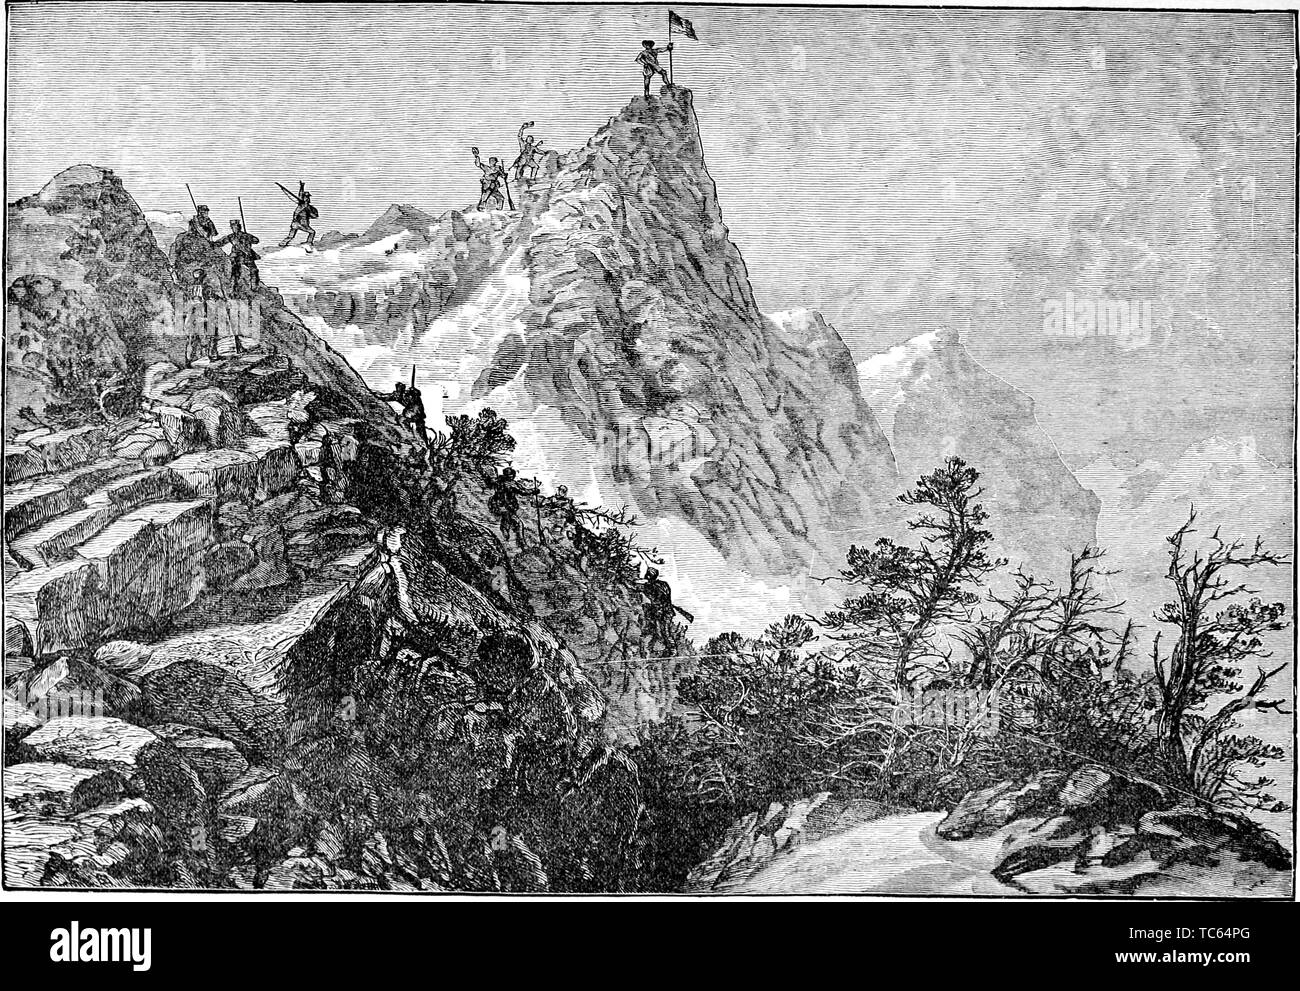 Engraving of John Charles Fremont holding an American flag on the Rocky Mountains, from the book 'A popular history of the United States of America, from the aboriginal times to the present day' by John Clark Ridpath, 1893. Courtesy Internet Archive. () Stock Photo